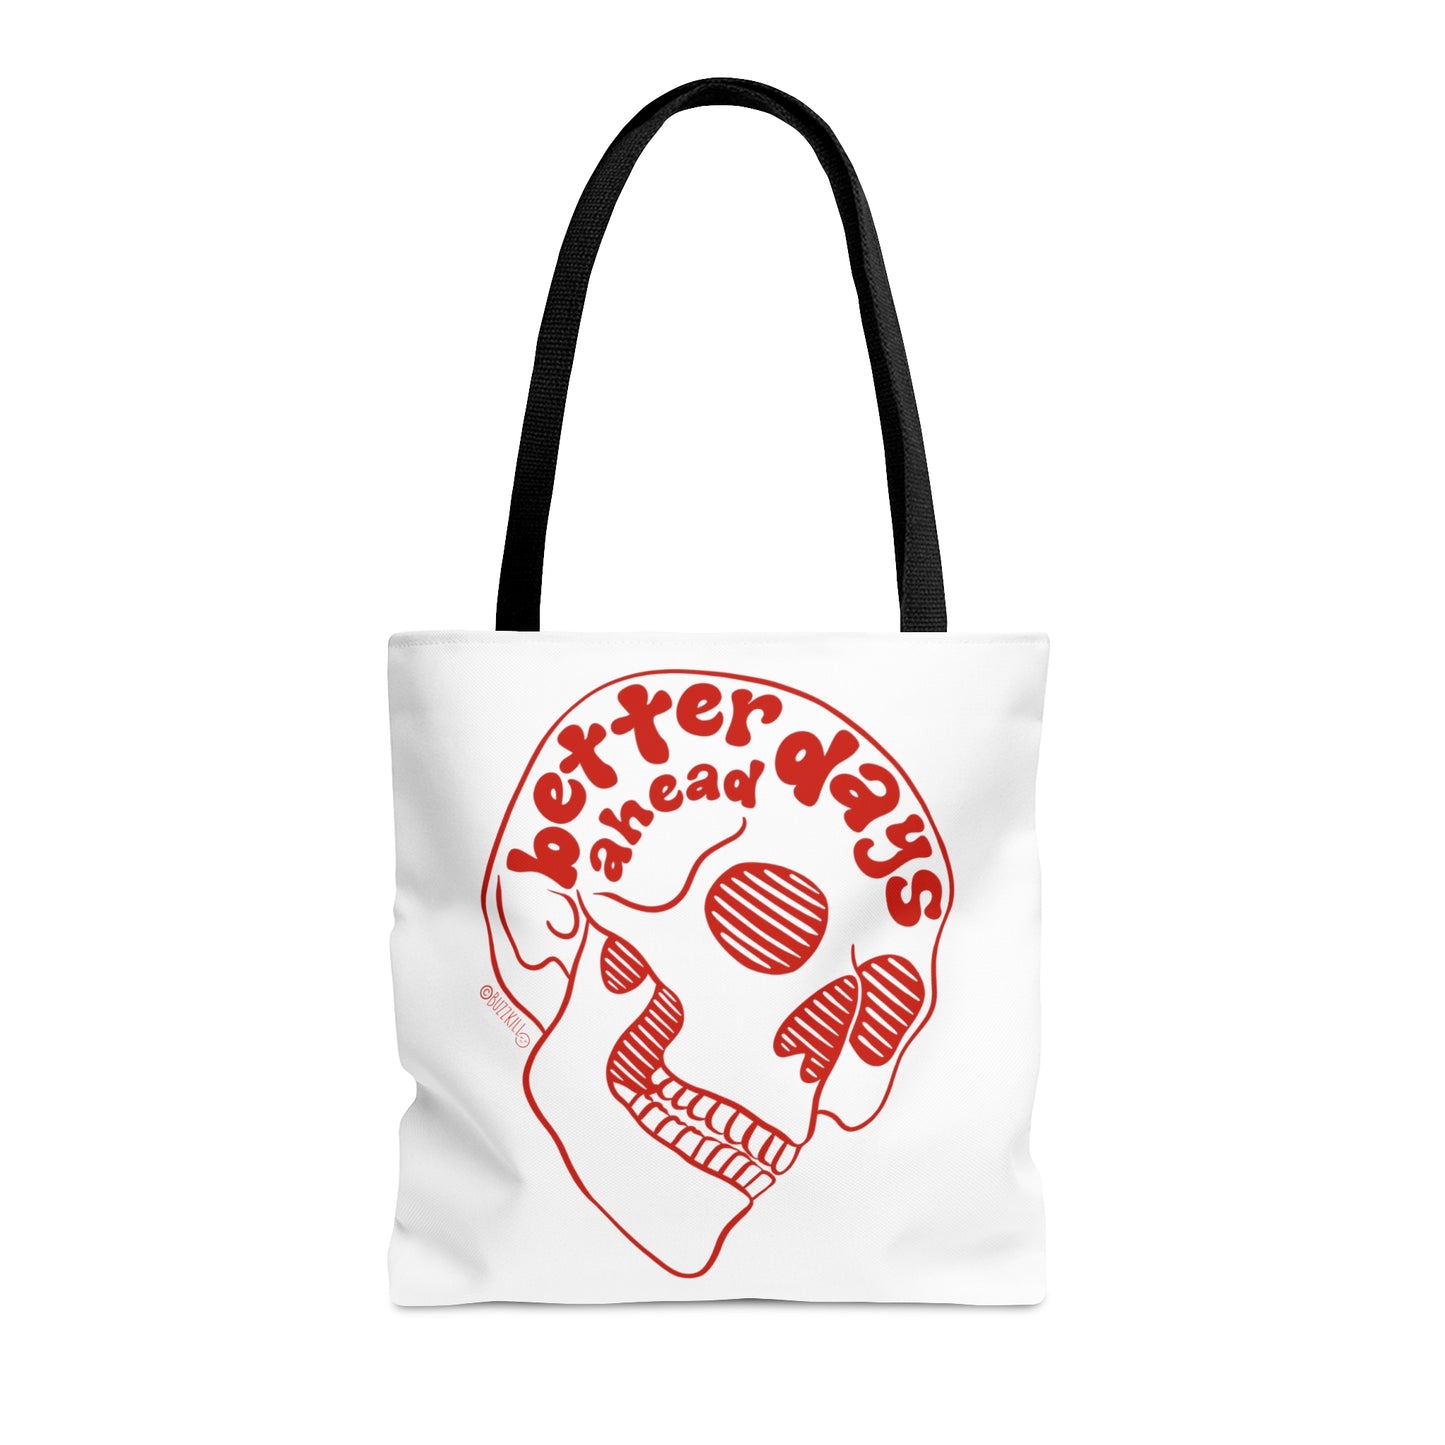 Better Days Ahead - Tote Bag